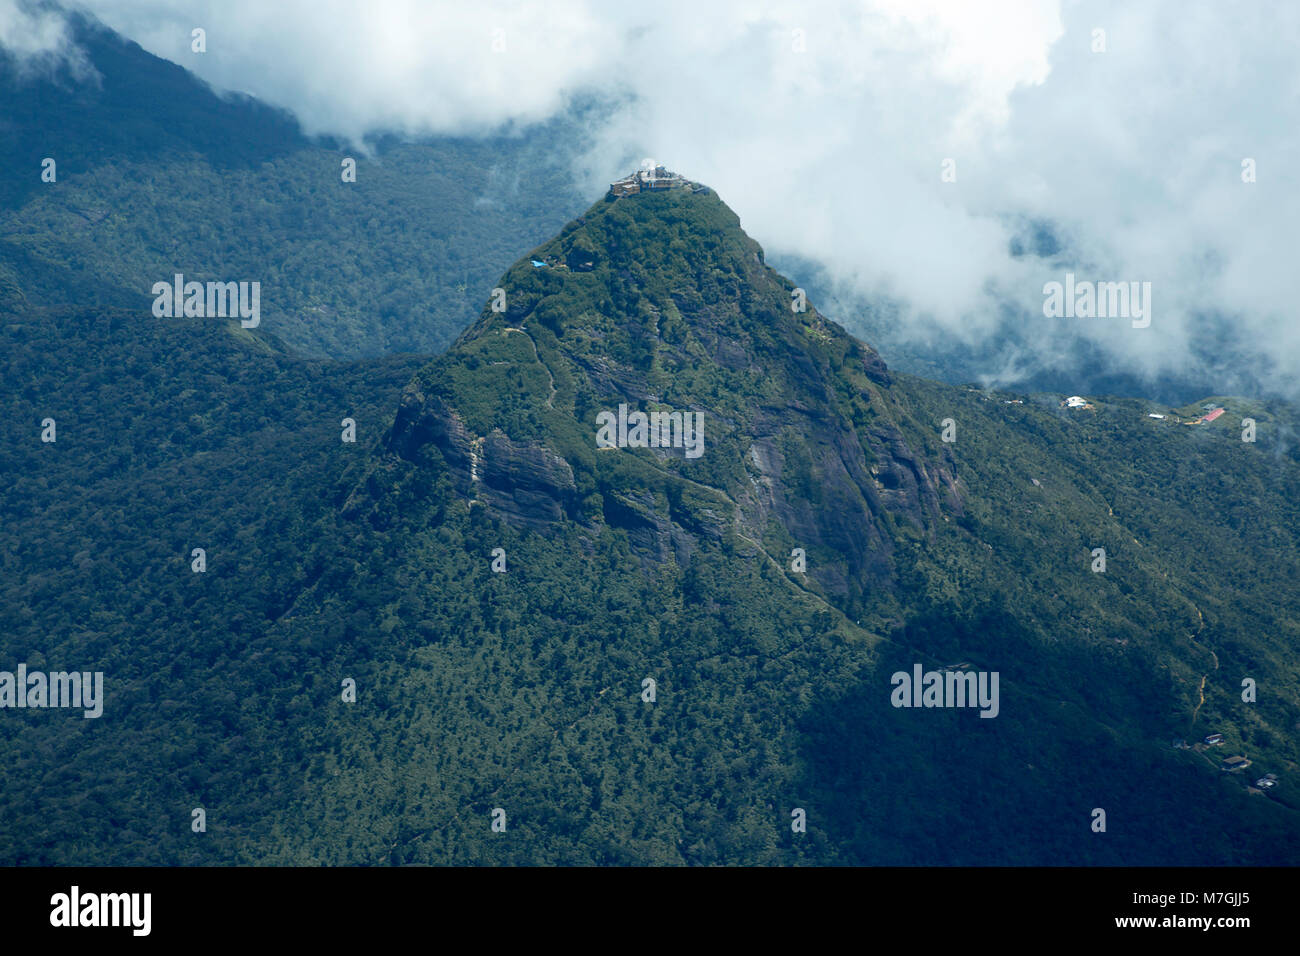 Adam's Peak, is a 2,243 m tall conical mountain located in central Sri Lanka. It is well known for the Sri Pada, or 'sacred footprint', which is belie Stock Photo